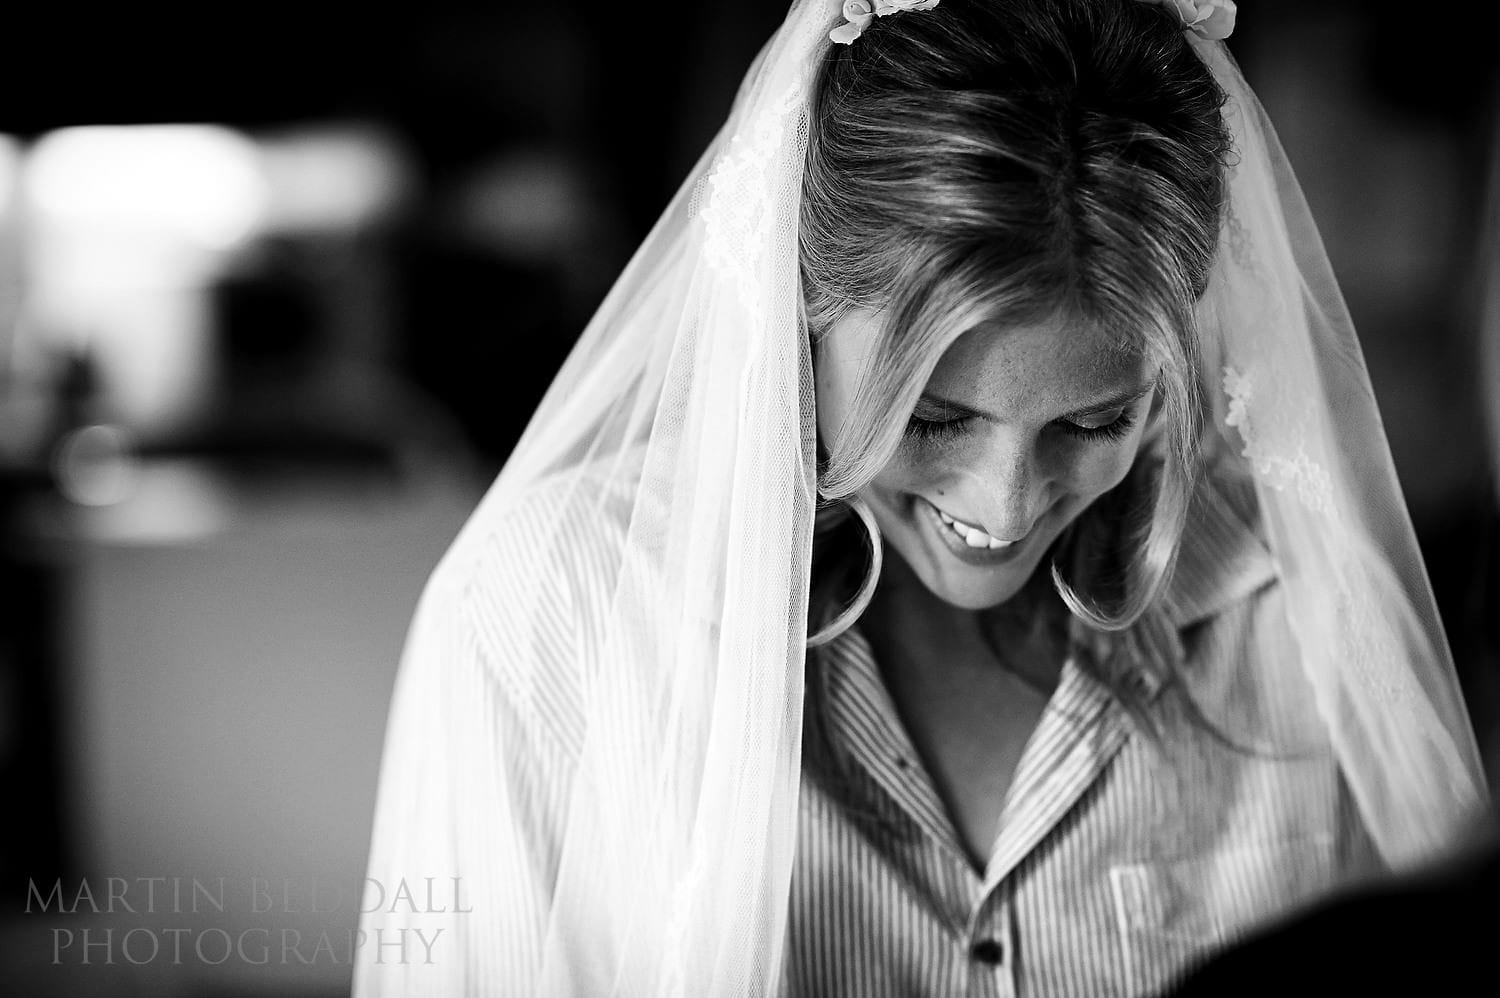 Bride with her veil on